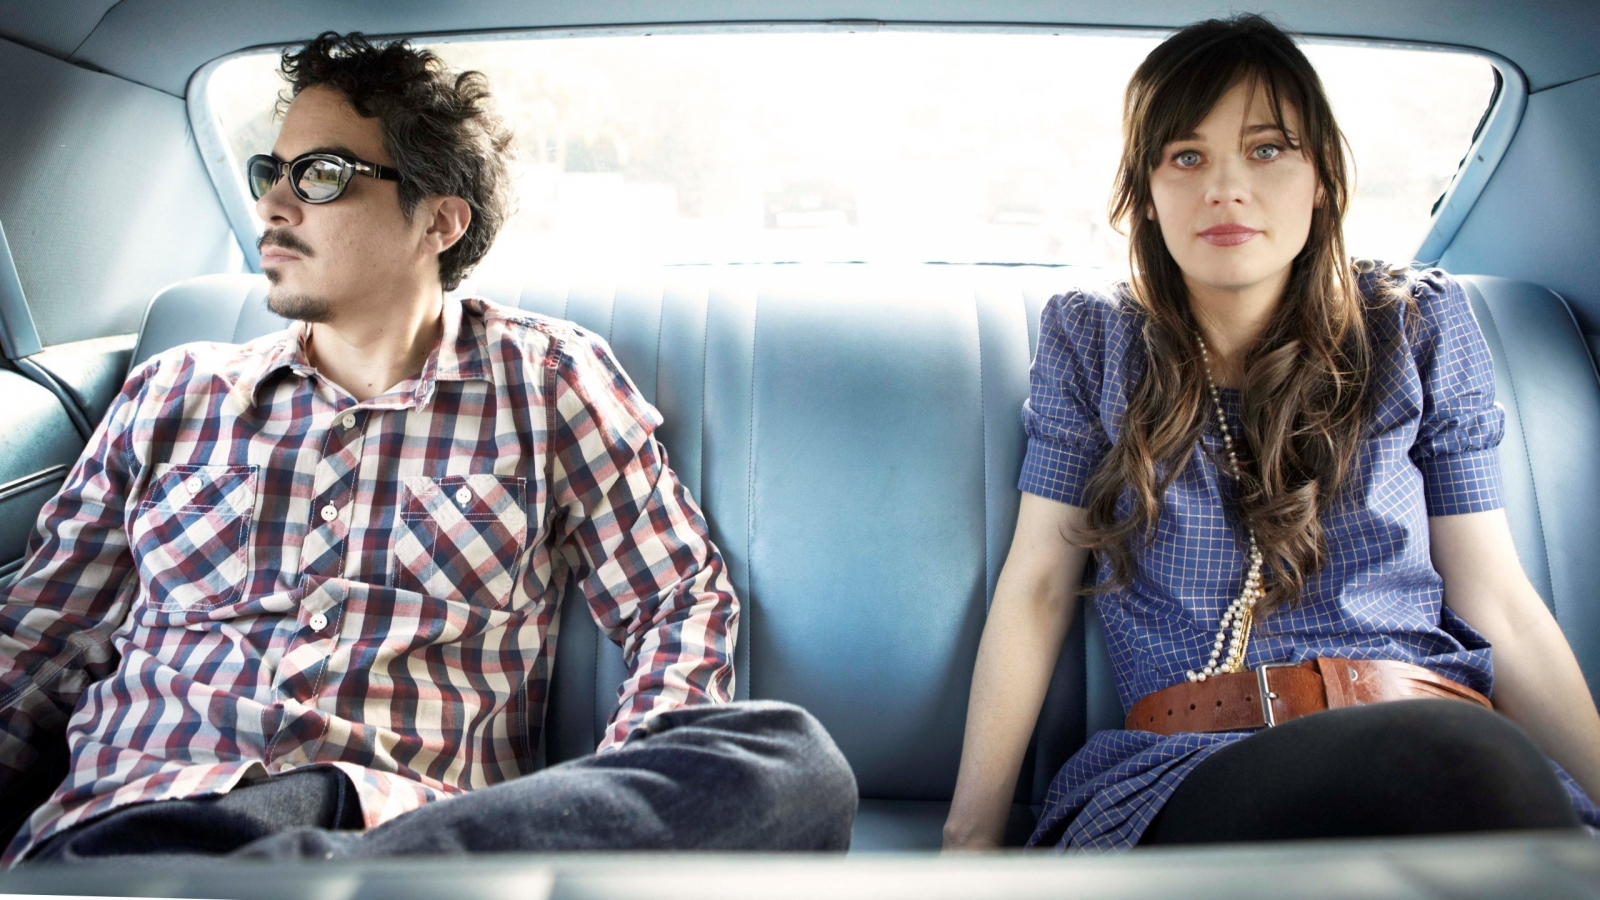 She and Him Band for 1600 x 900 HDTV resolution